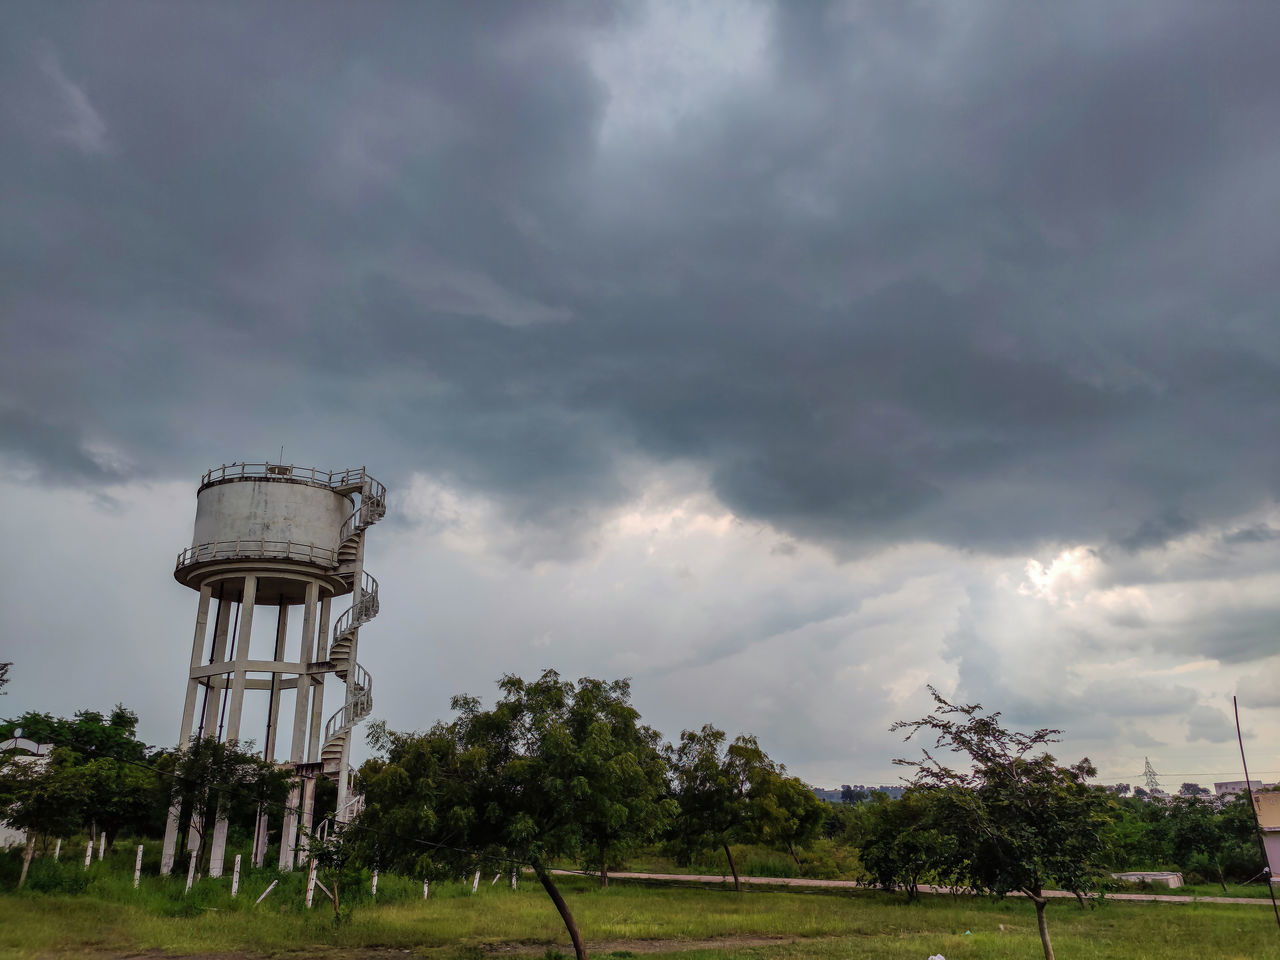 cloud, sky, tower, water tower, nature, storm, plant, environment, architecture, built structure, storm cloud, tree, wind, outdoors, no people, overcast, water tower - storage tank, rural area, grass, protection, building exterior, dramatic sky